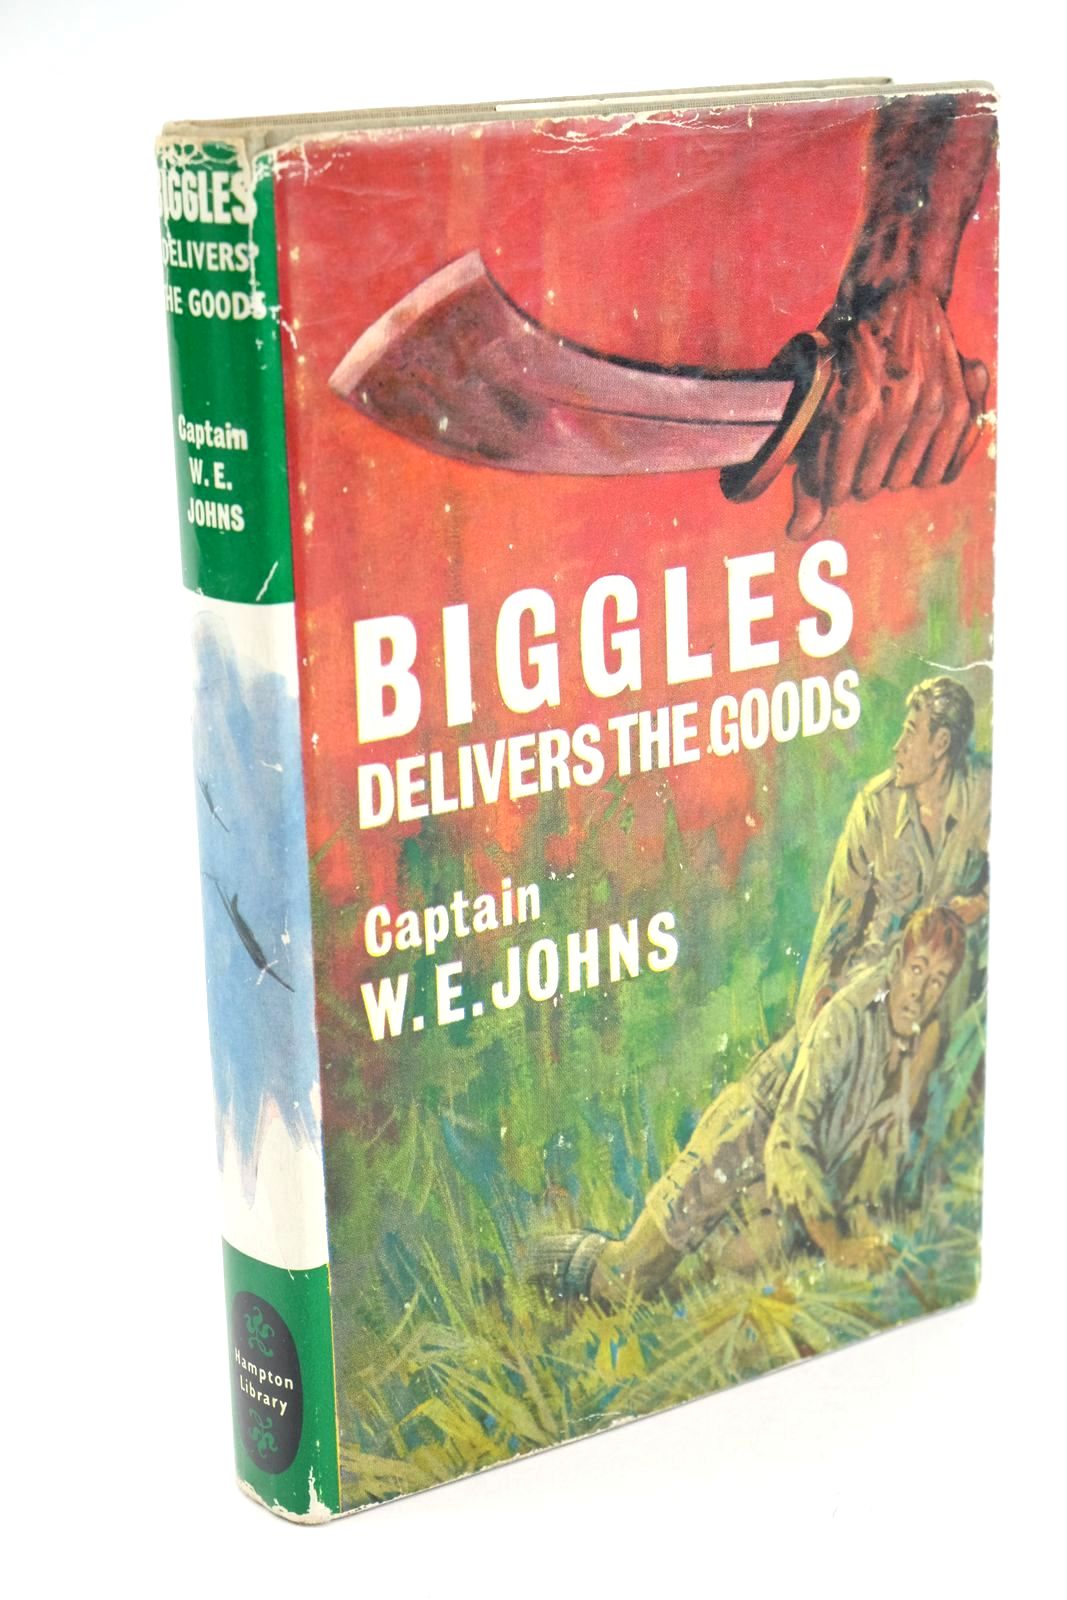 Photo of BIGGLES DELIVERS THE GOODS written by Johns, W.E. illustrated by Stead,  published by Hodder & Stoughton (STOCK CODE: 1324853)  for sale by Stella & Rose's Books